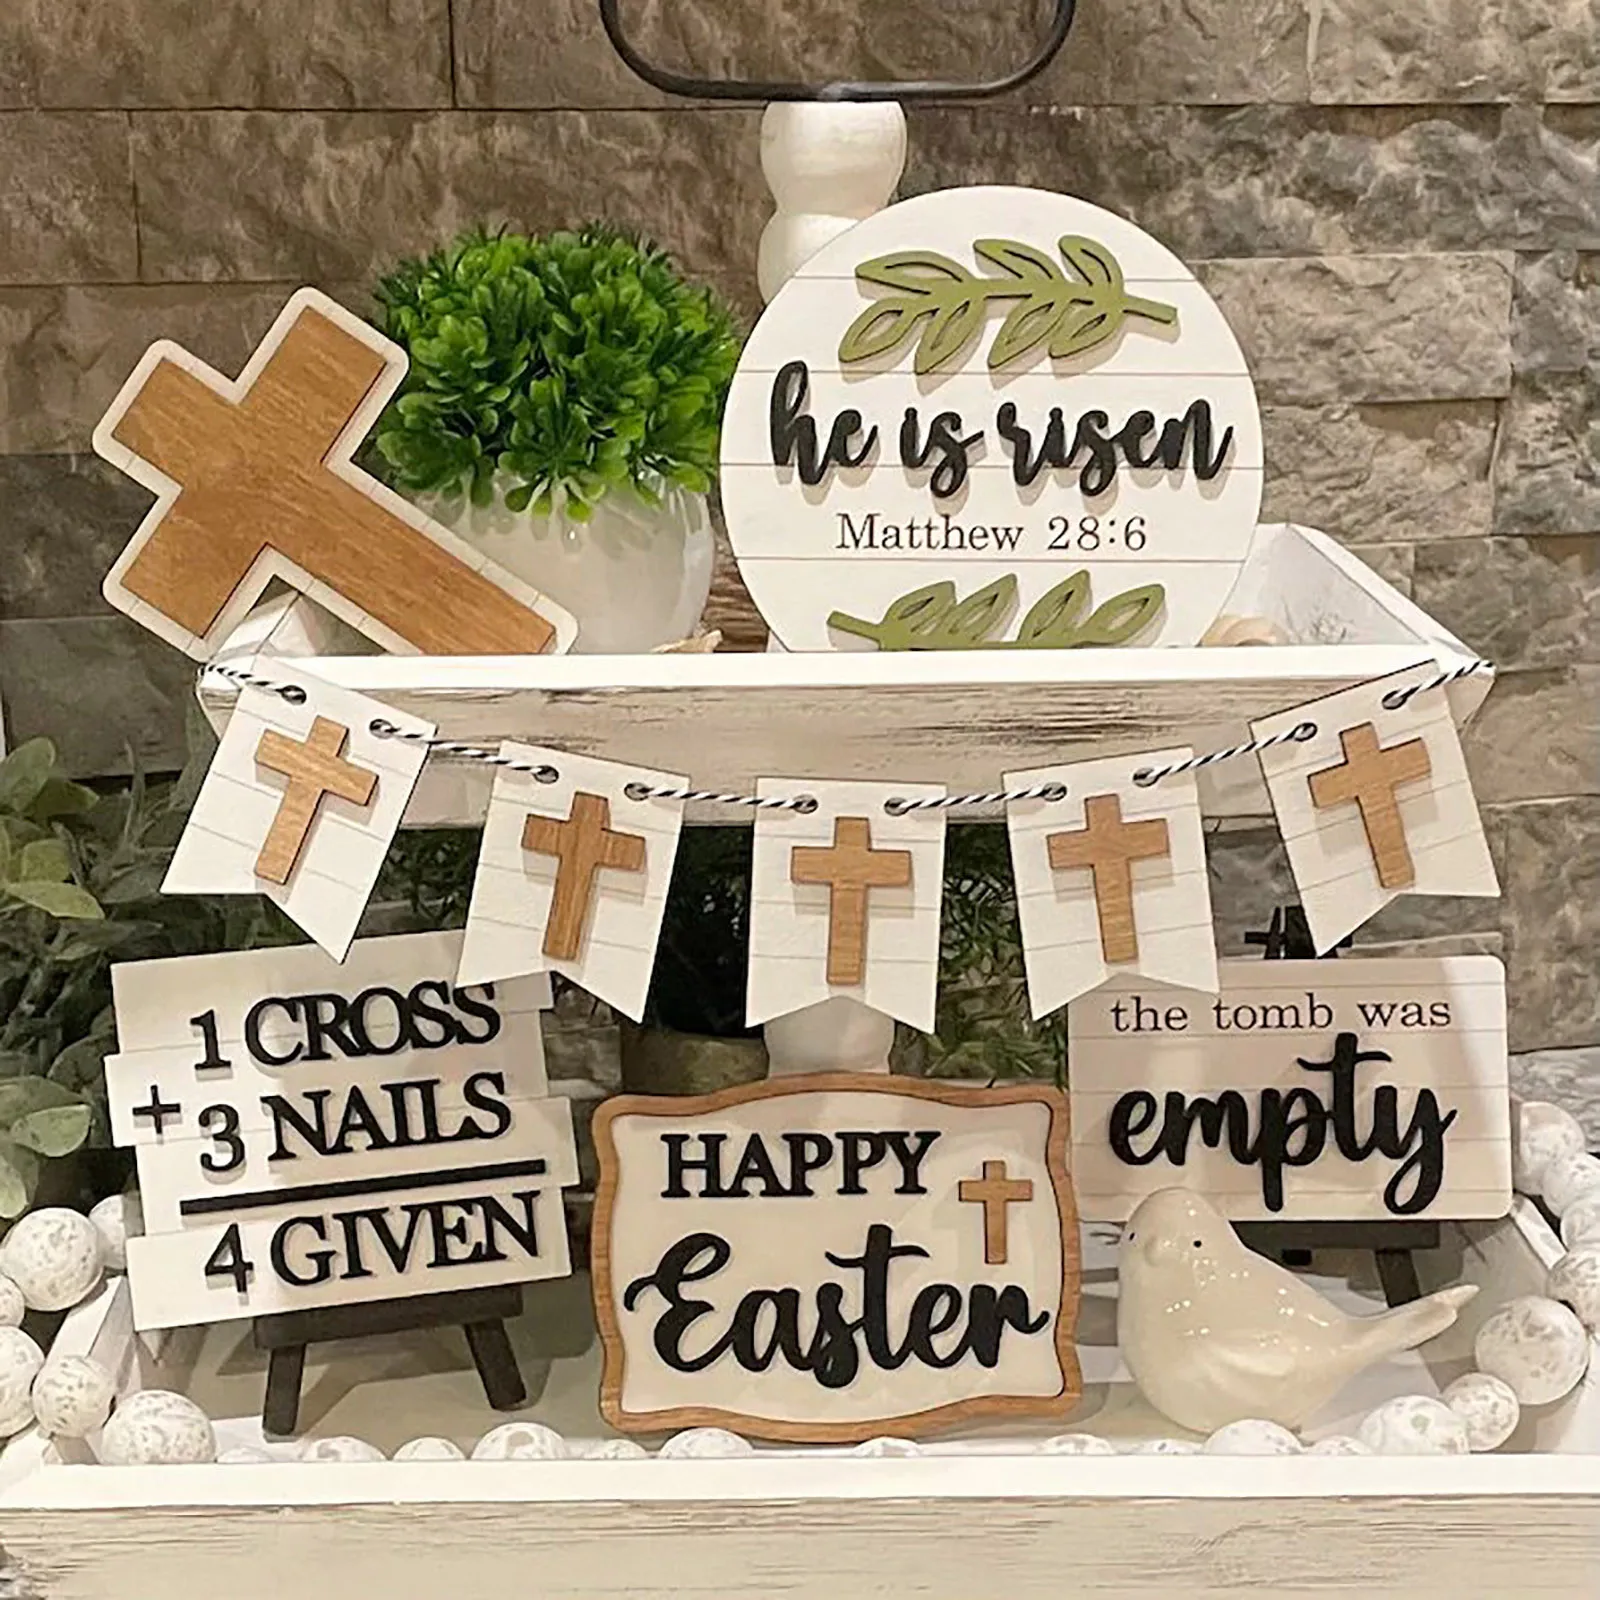 New "He Is Risen" Easter Wood MINI ROLLING PIN Farmhouse Tier Tray Table Decor